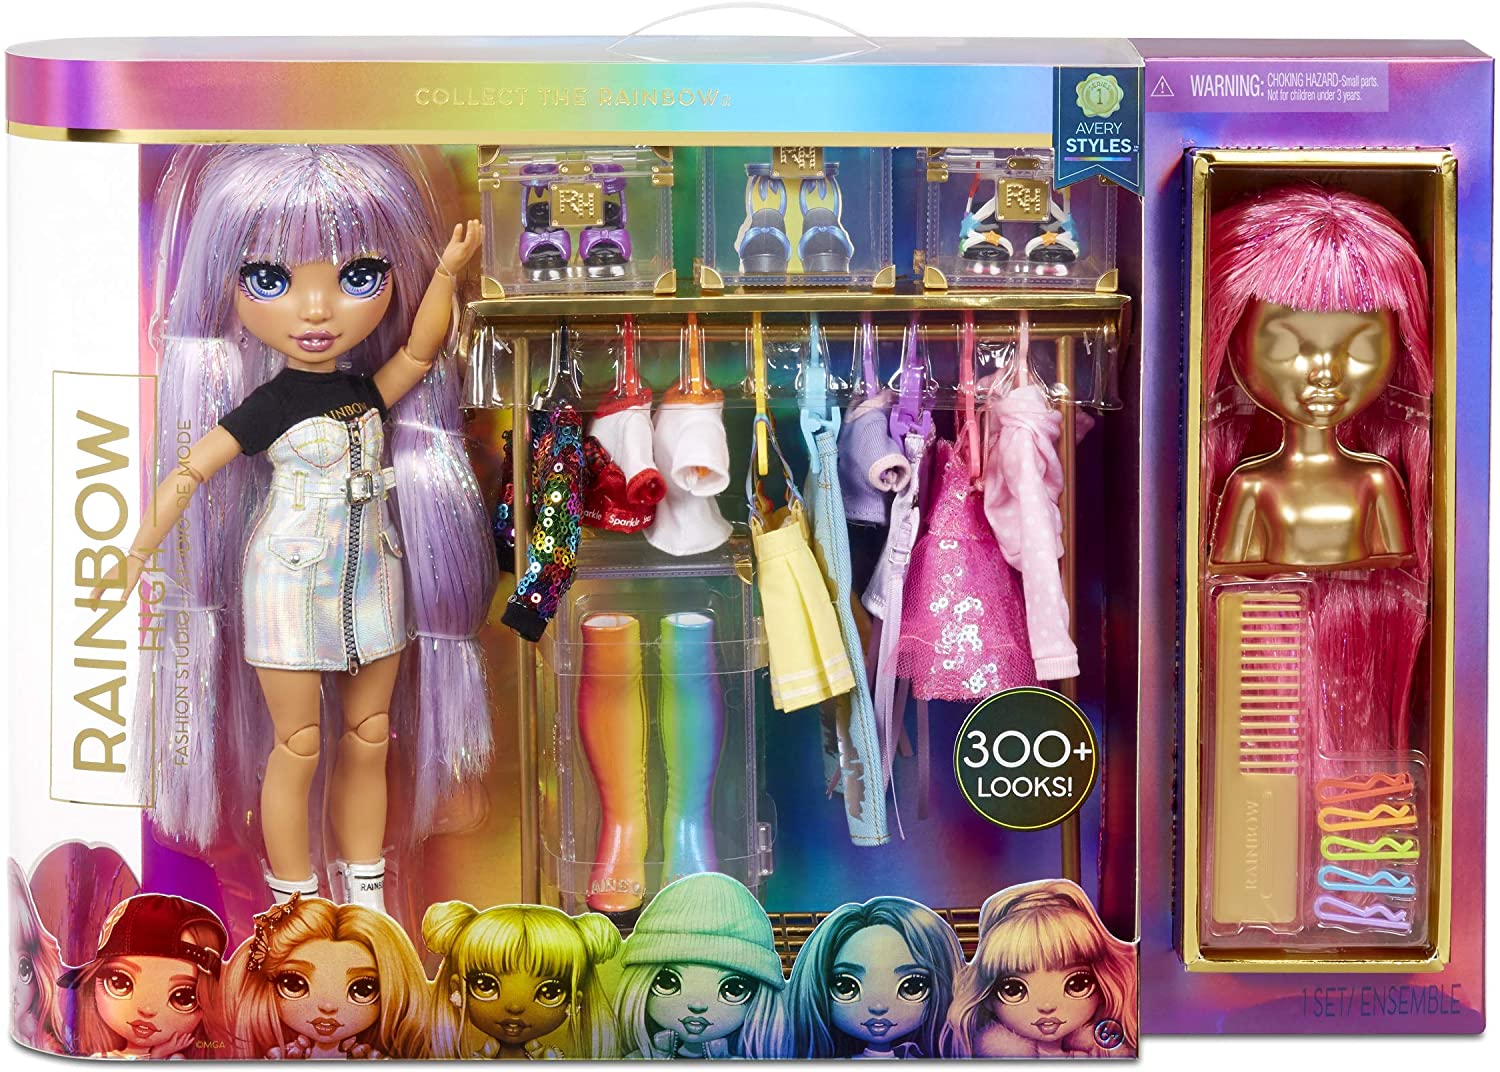 Rainbow High Fashion Studio – Exclusive Doll with Rainbow of Fashions (Clothes and Accessories) and 2 Sparkly Wigs to Create 300+ Looks